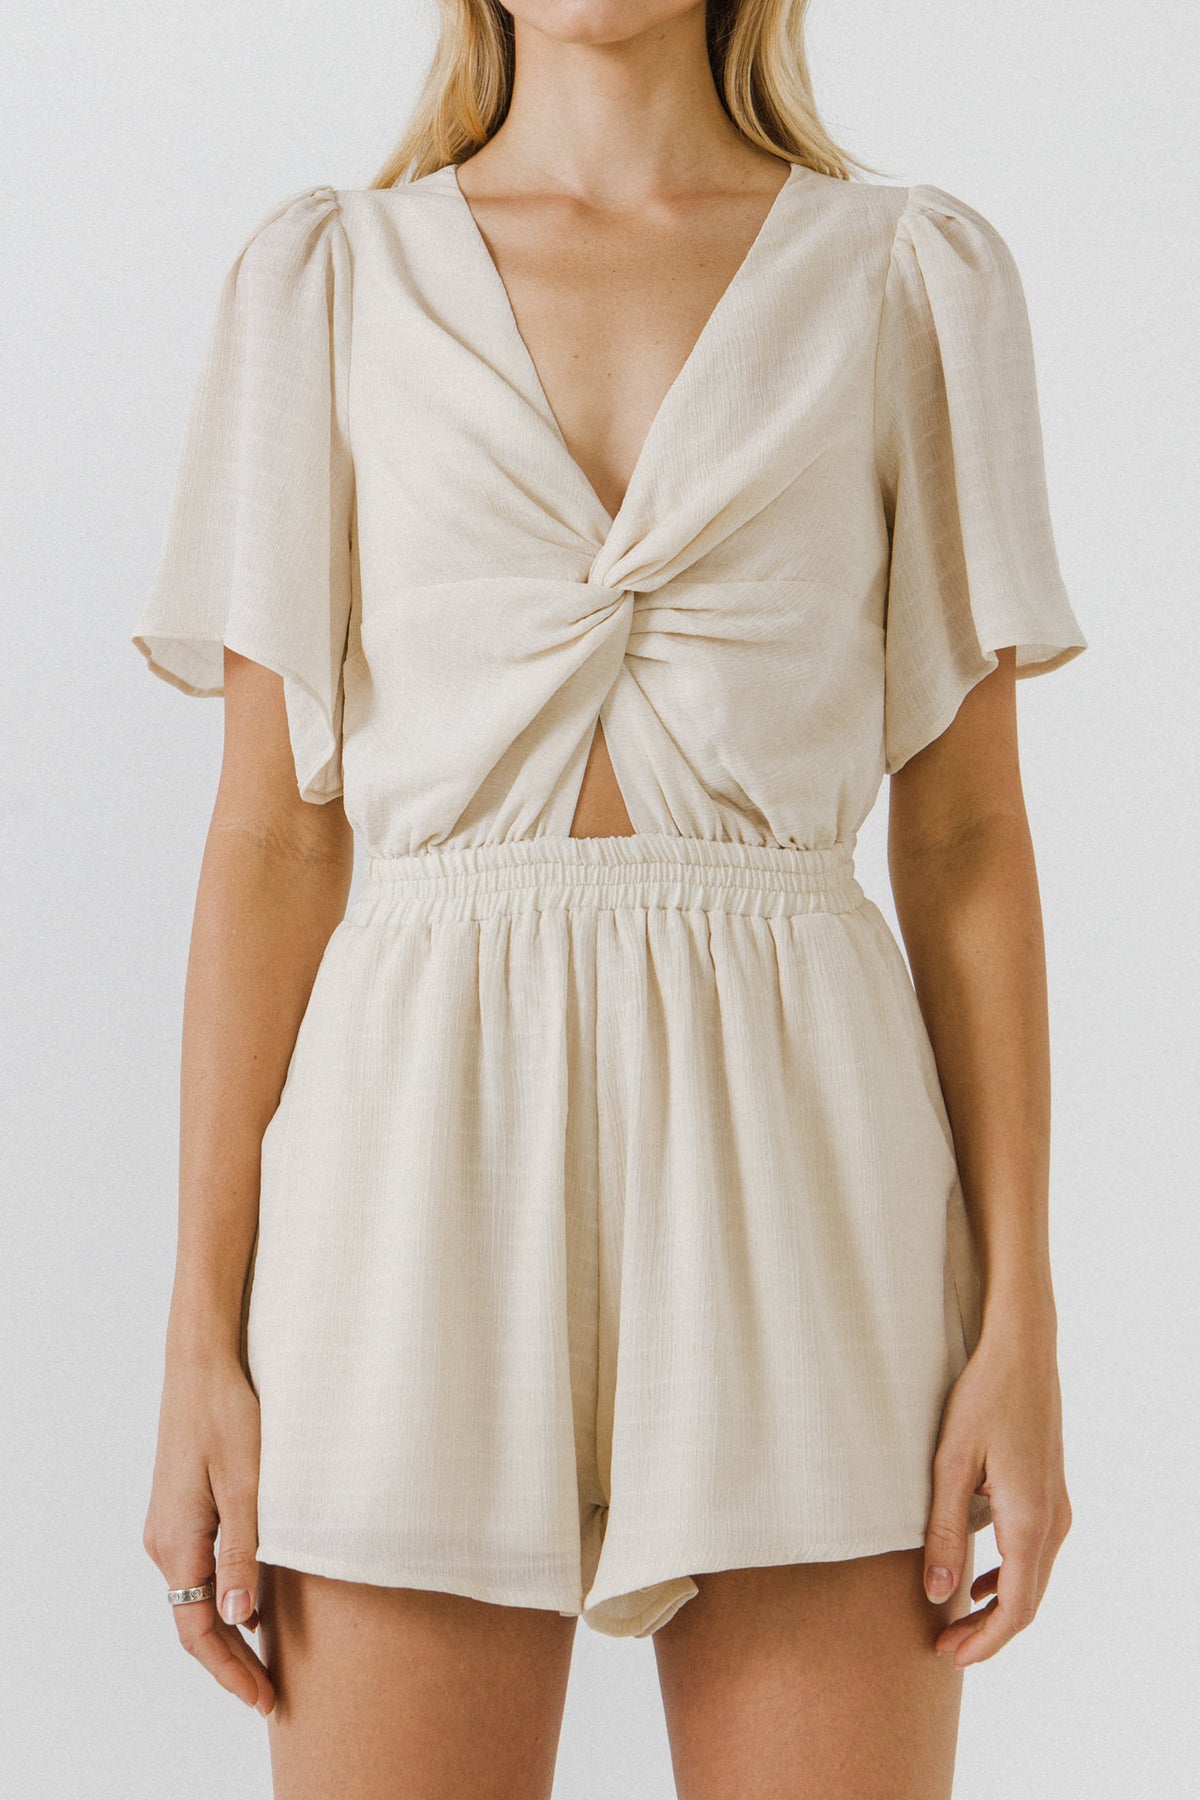 FREE THE ROSES - Knotted Romper - ROMPERS available at Objectrare